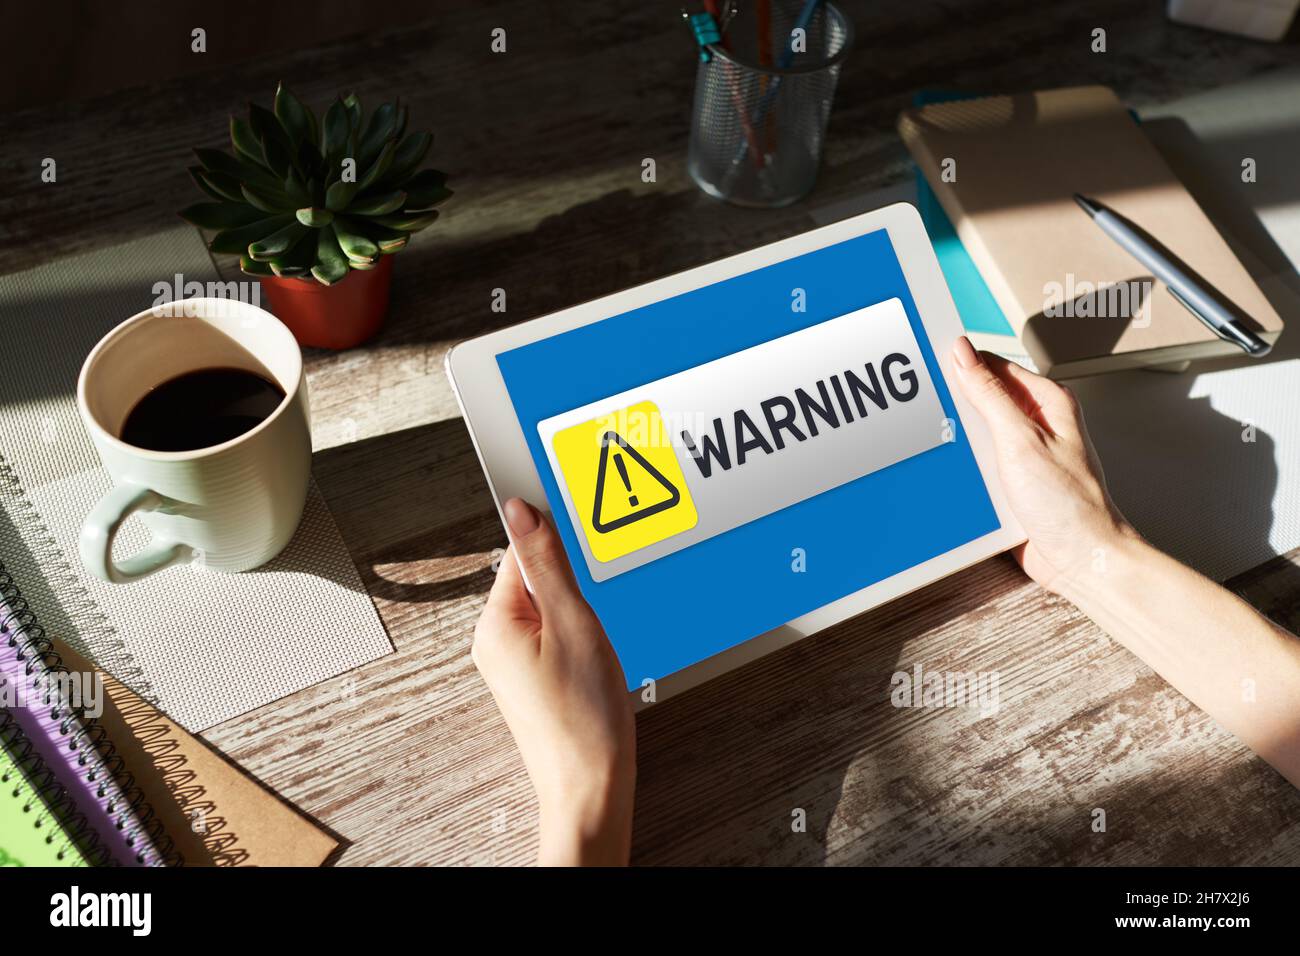 Warning message sign on screen. Virus detection security breathe hardware or software trouble. Internet cyber security concept. Stock Photo